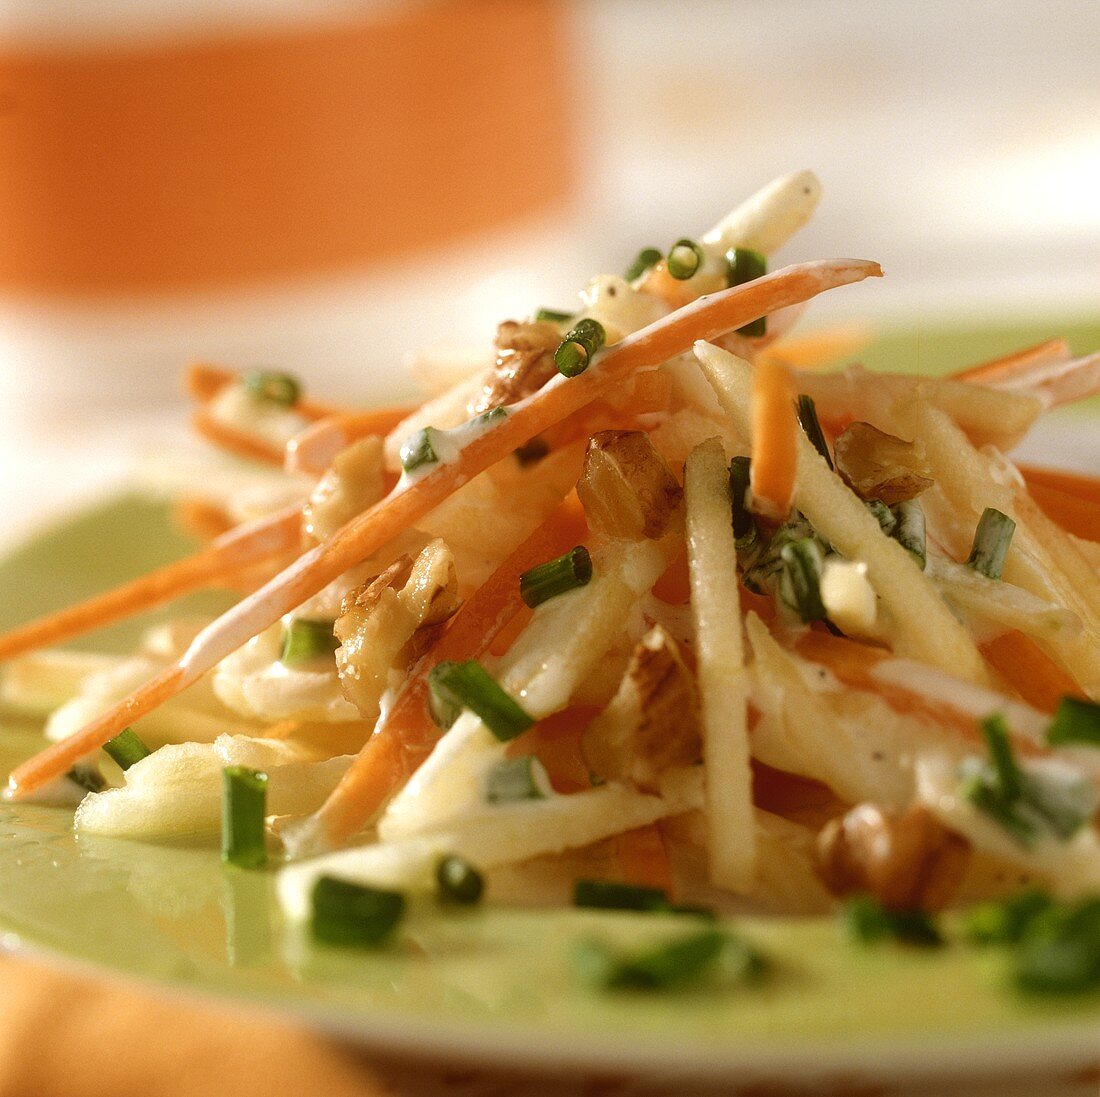 Carrot and apple salad with nuts and chives